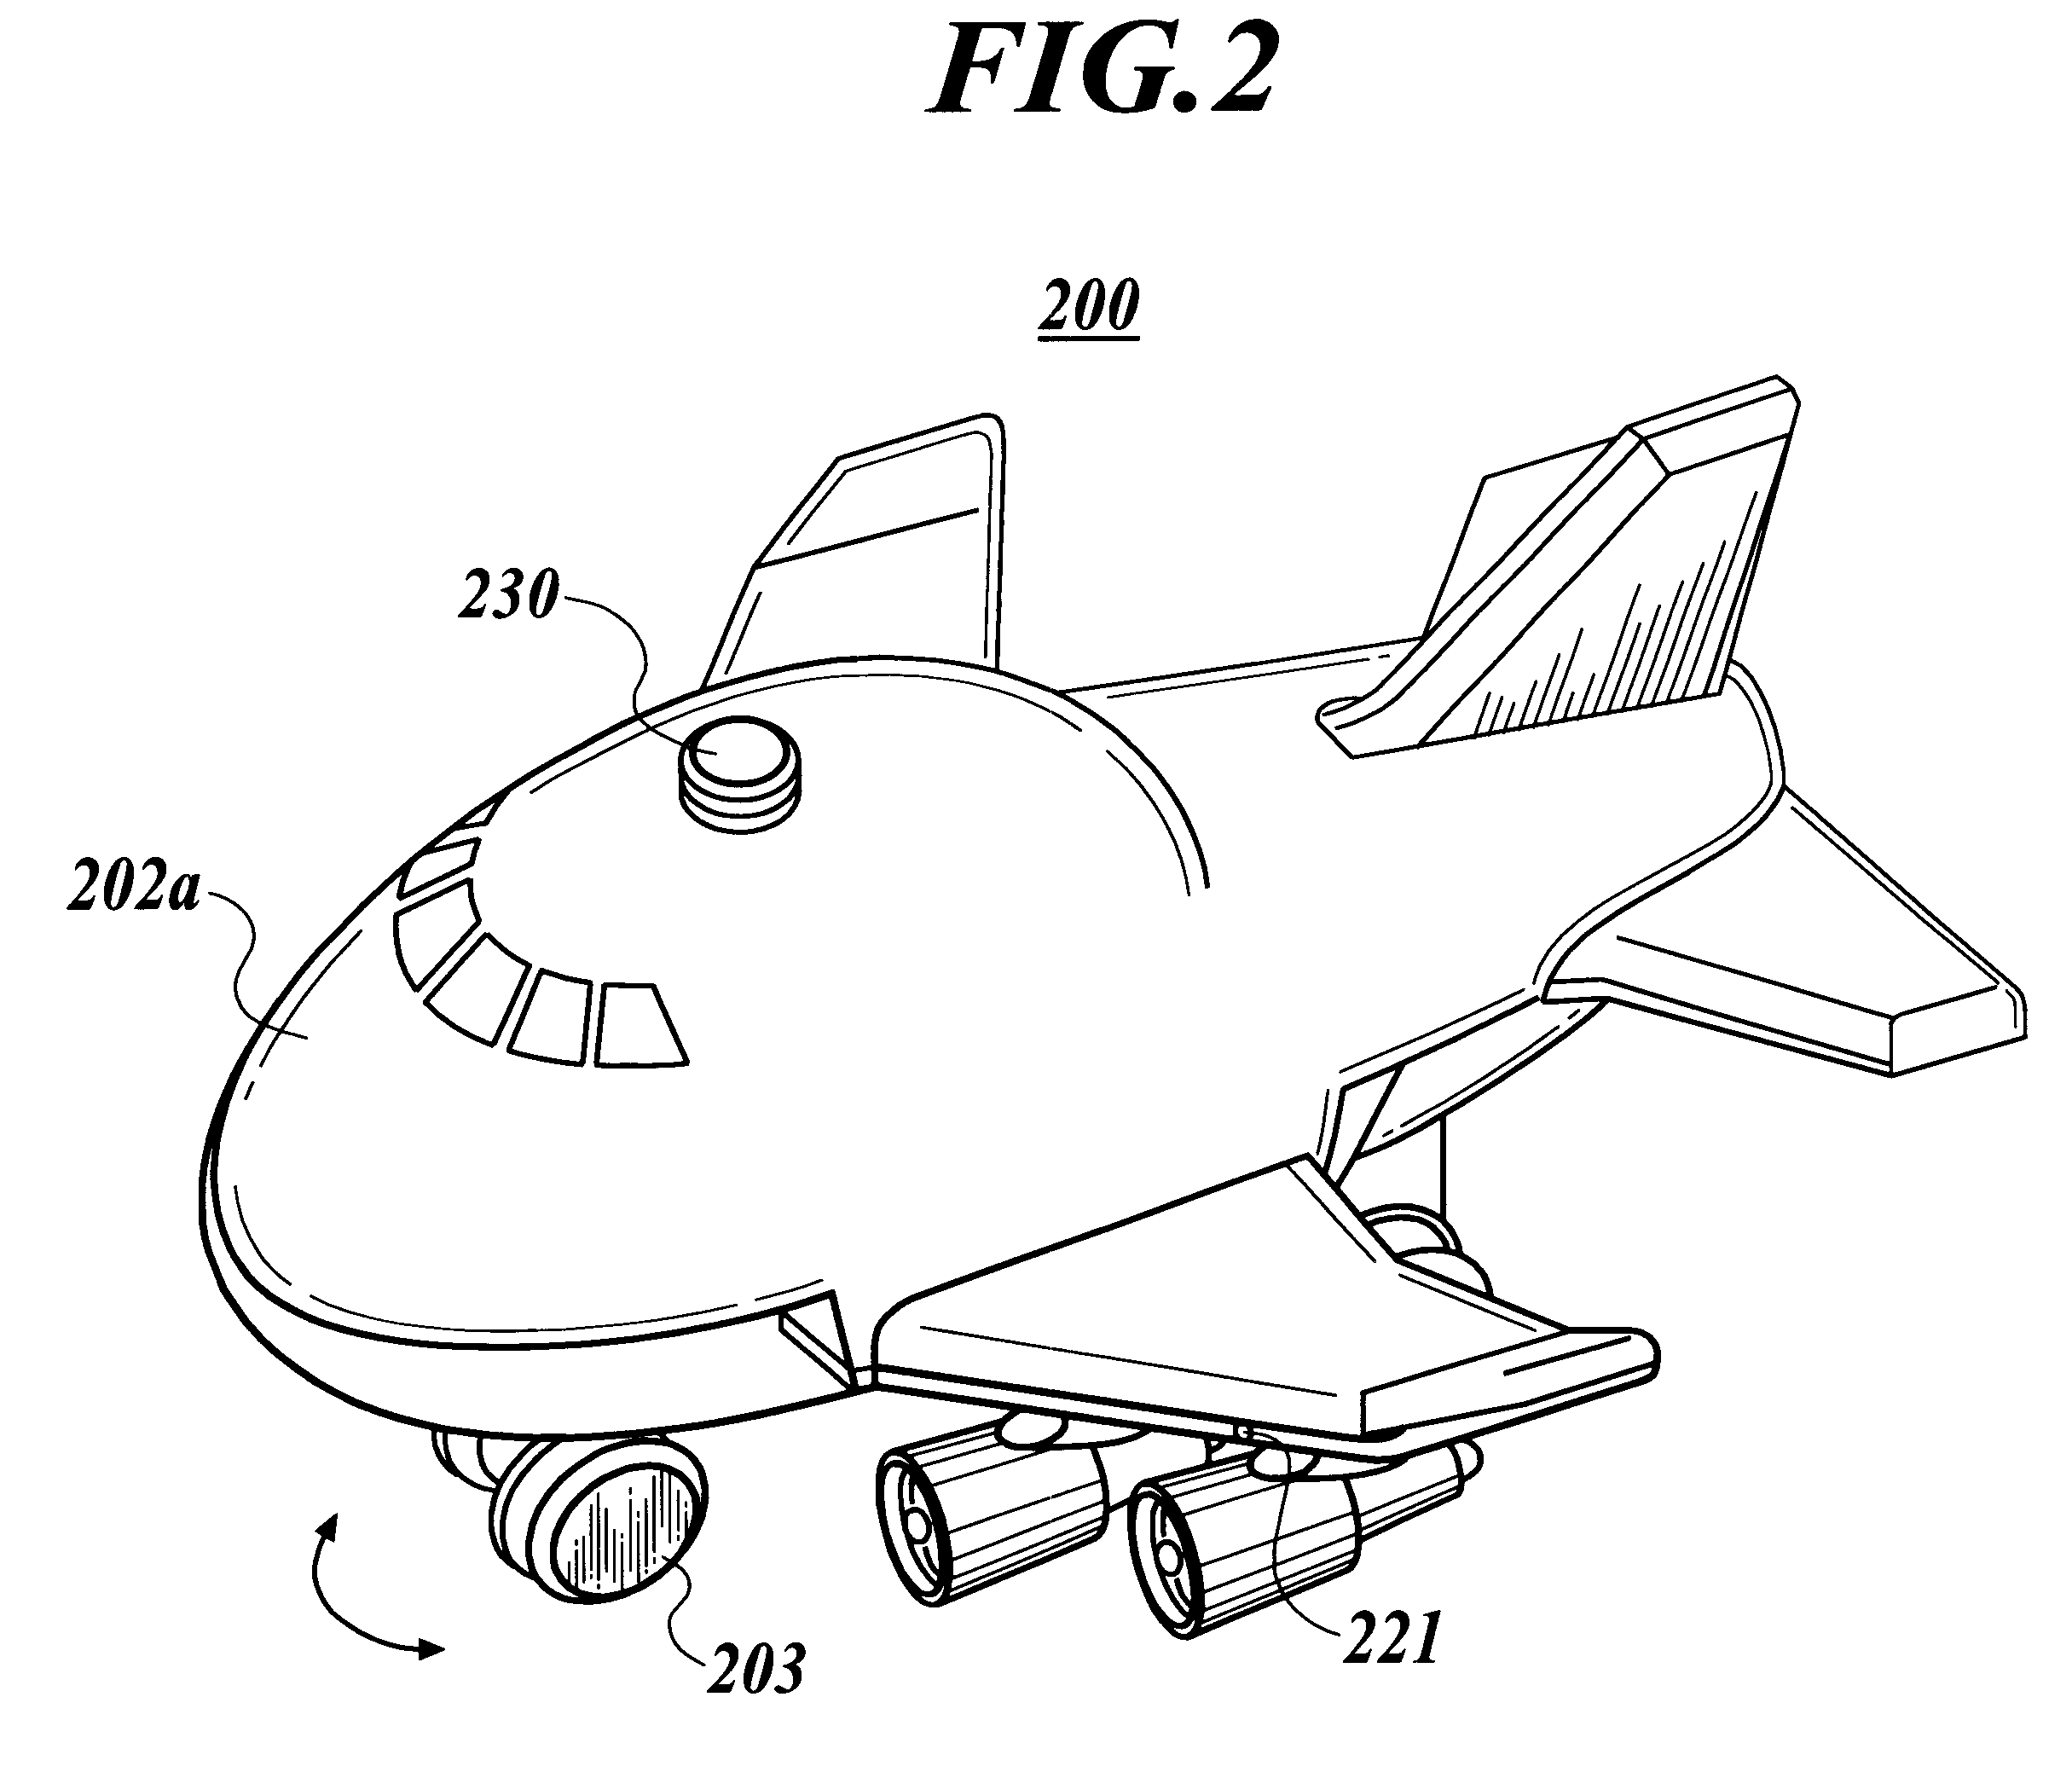 Toy having remote control device and remote controlled model vehicle